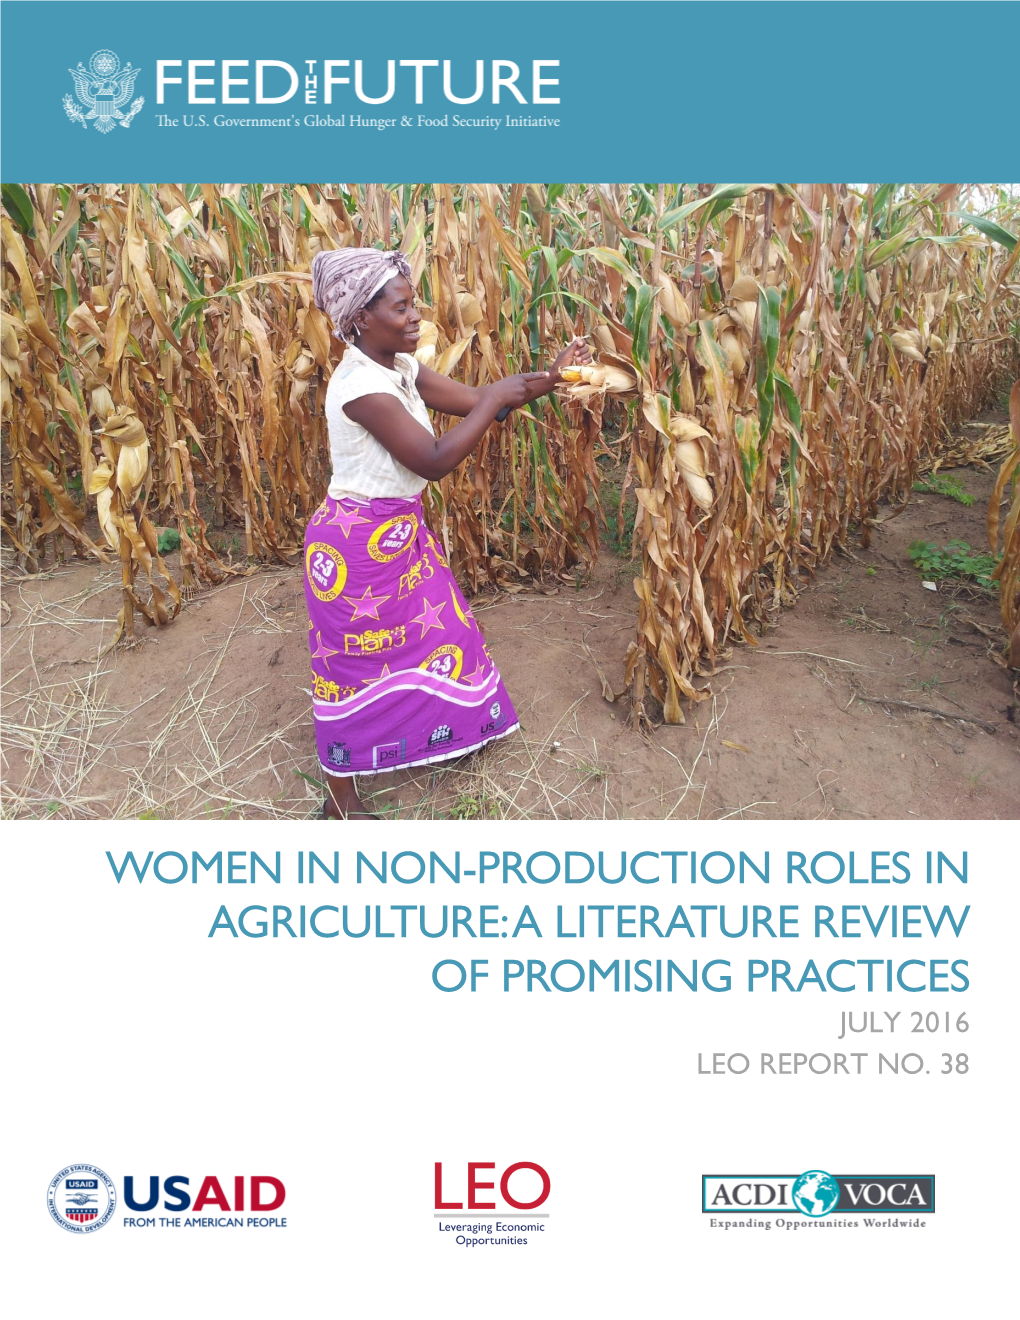 Women in Non-Production Roles in Agriculture: a Literature Review of Promising Practices